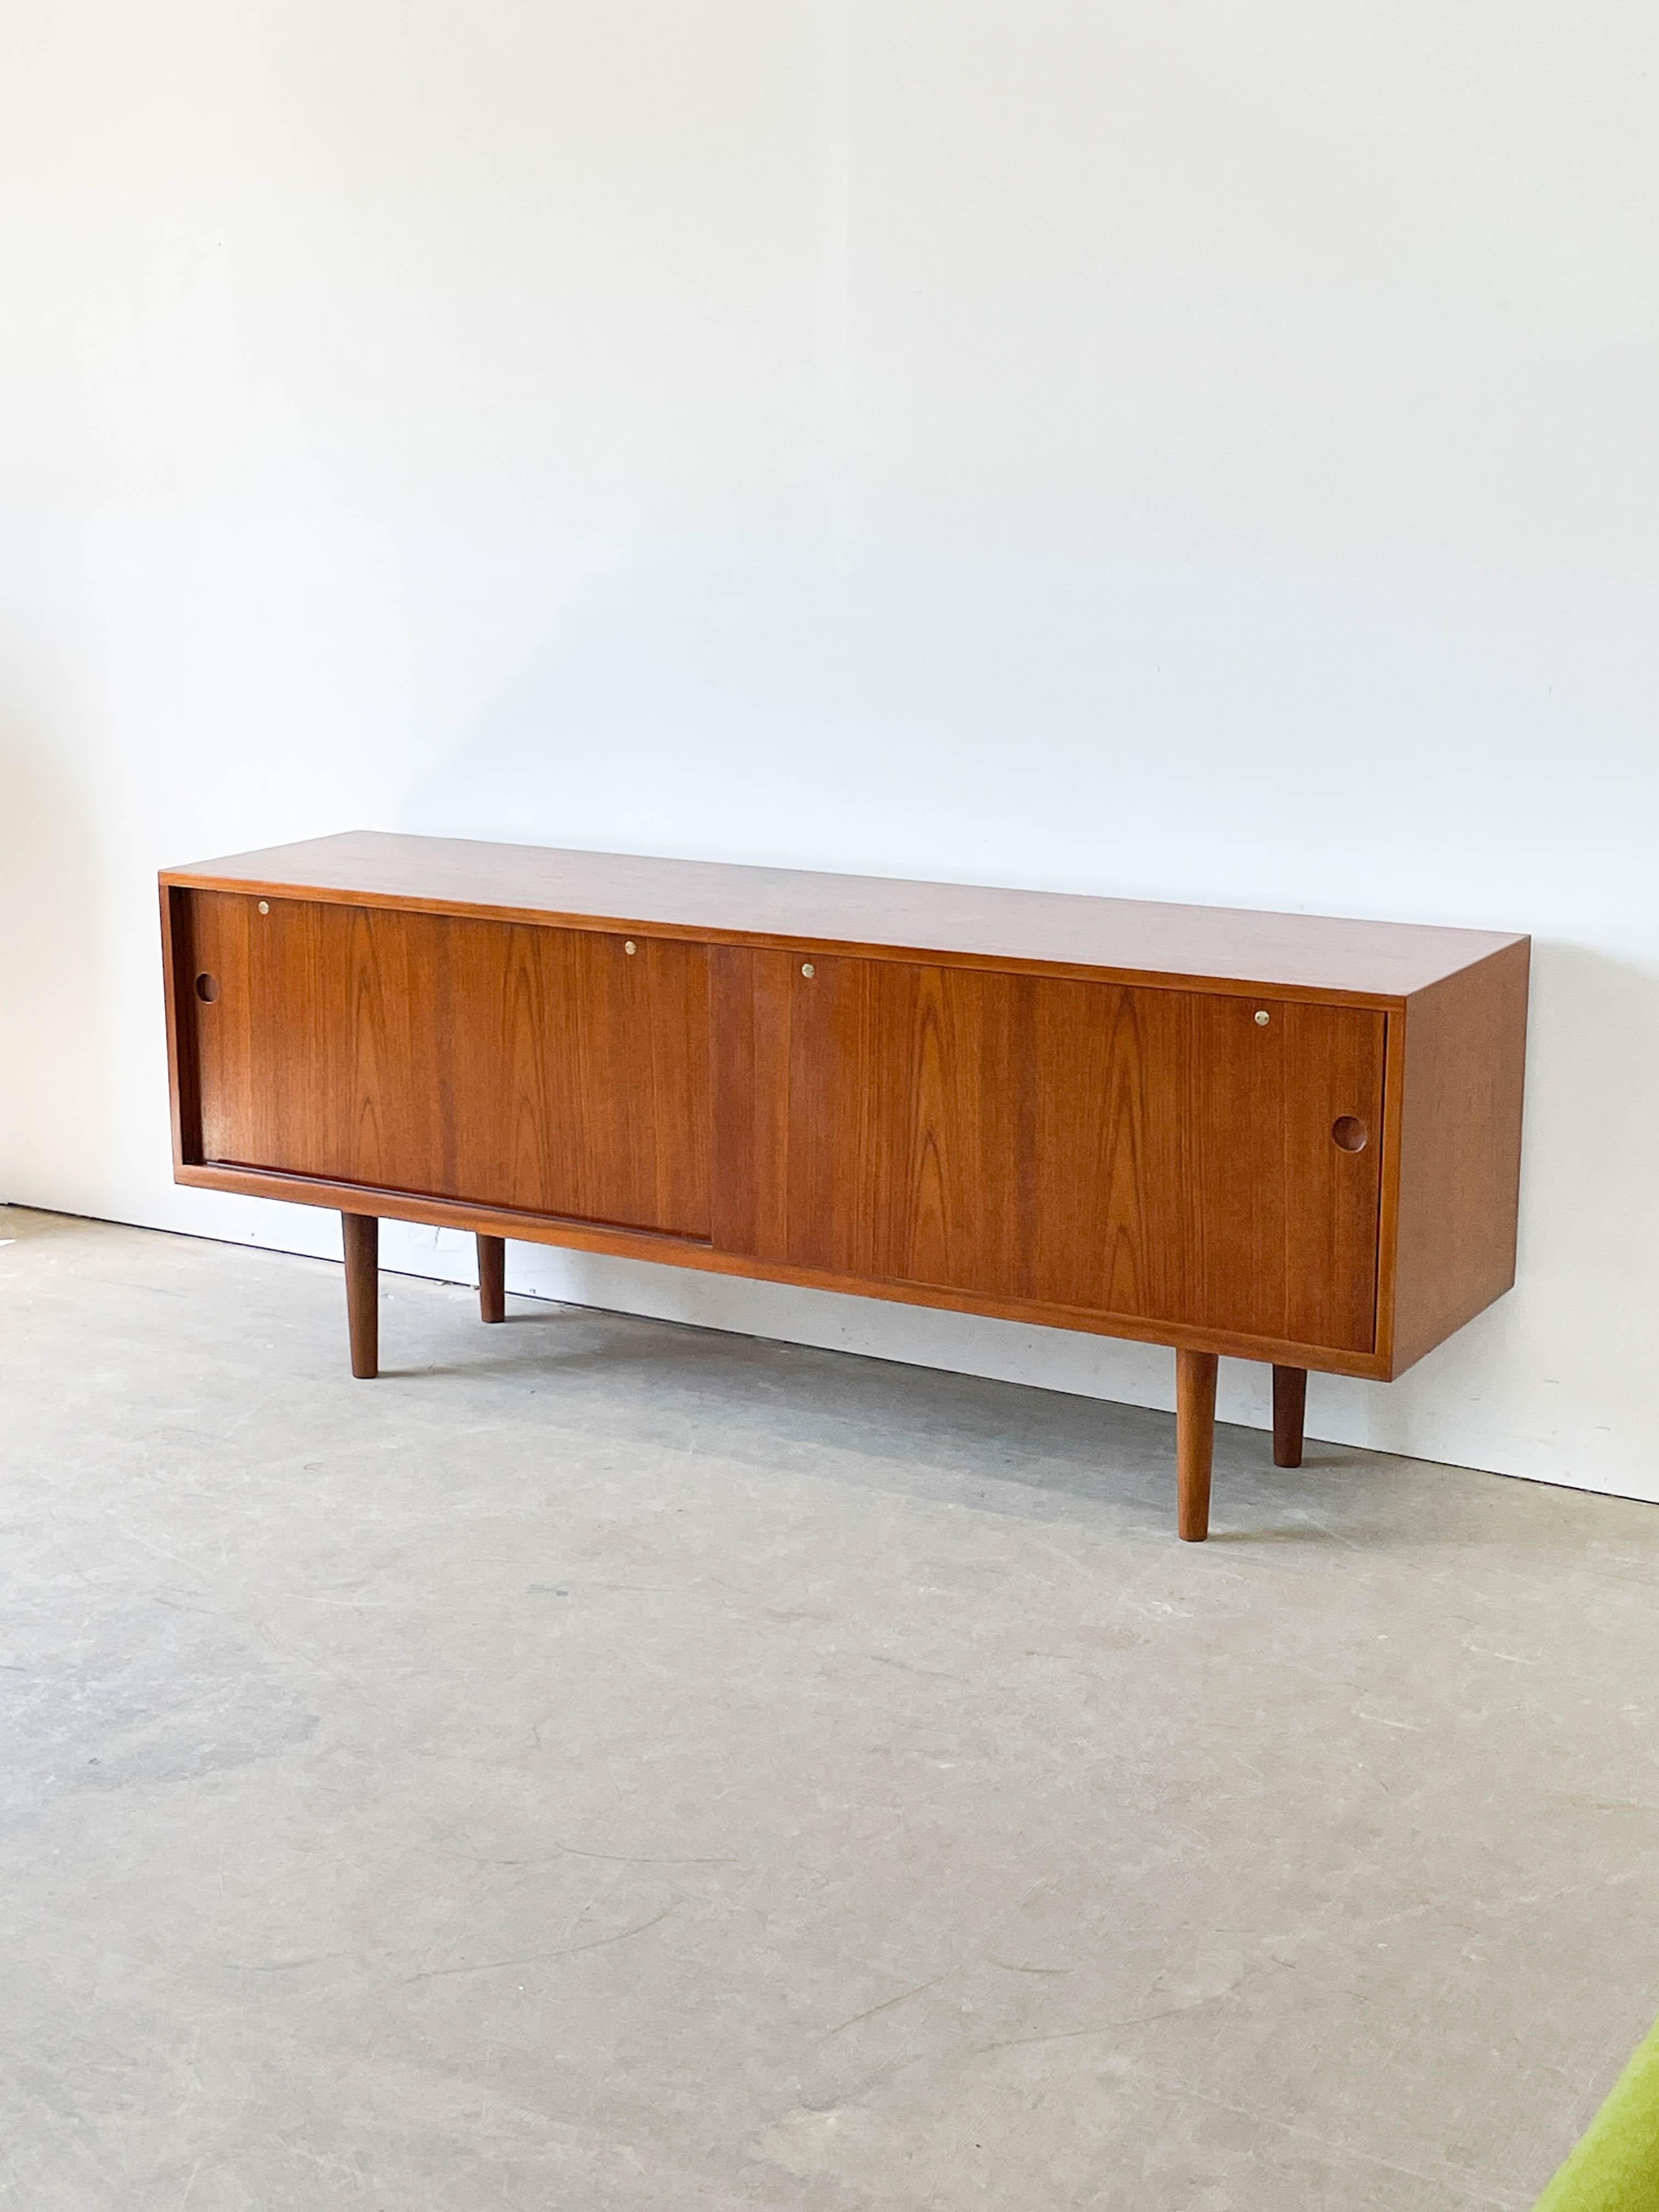 Introducing the Hans Wegner Teak Danish Modern Credenza RY26, a stunning piece of mid-century modern furniture that embodies elegance and functionality. The exquisite credenza is crafted from high-quality teak wood, showcasing the natural beauty and